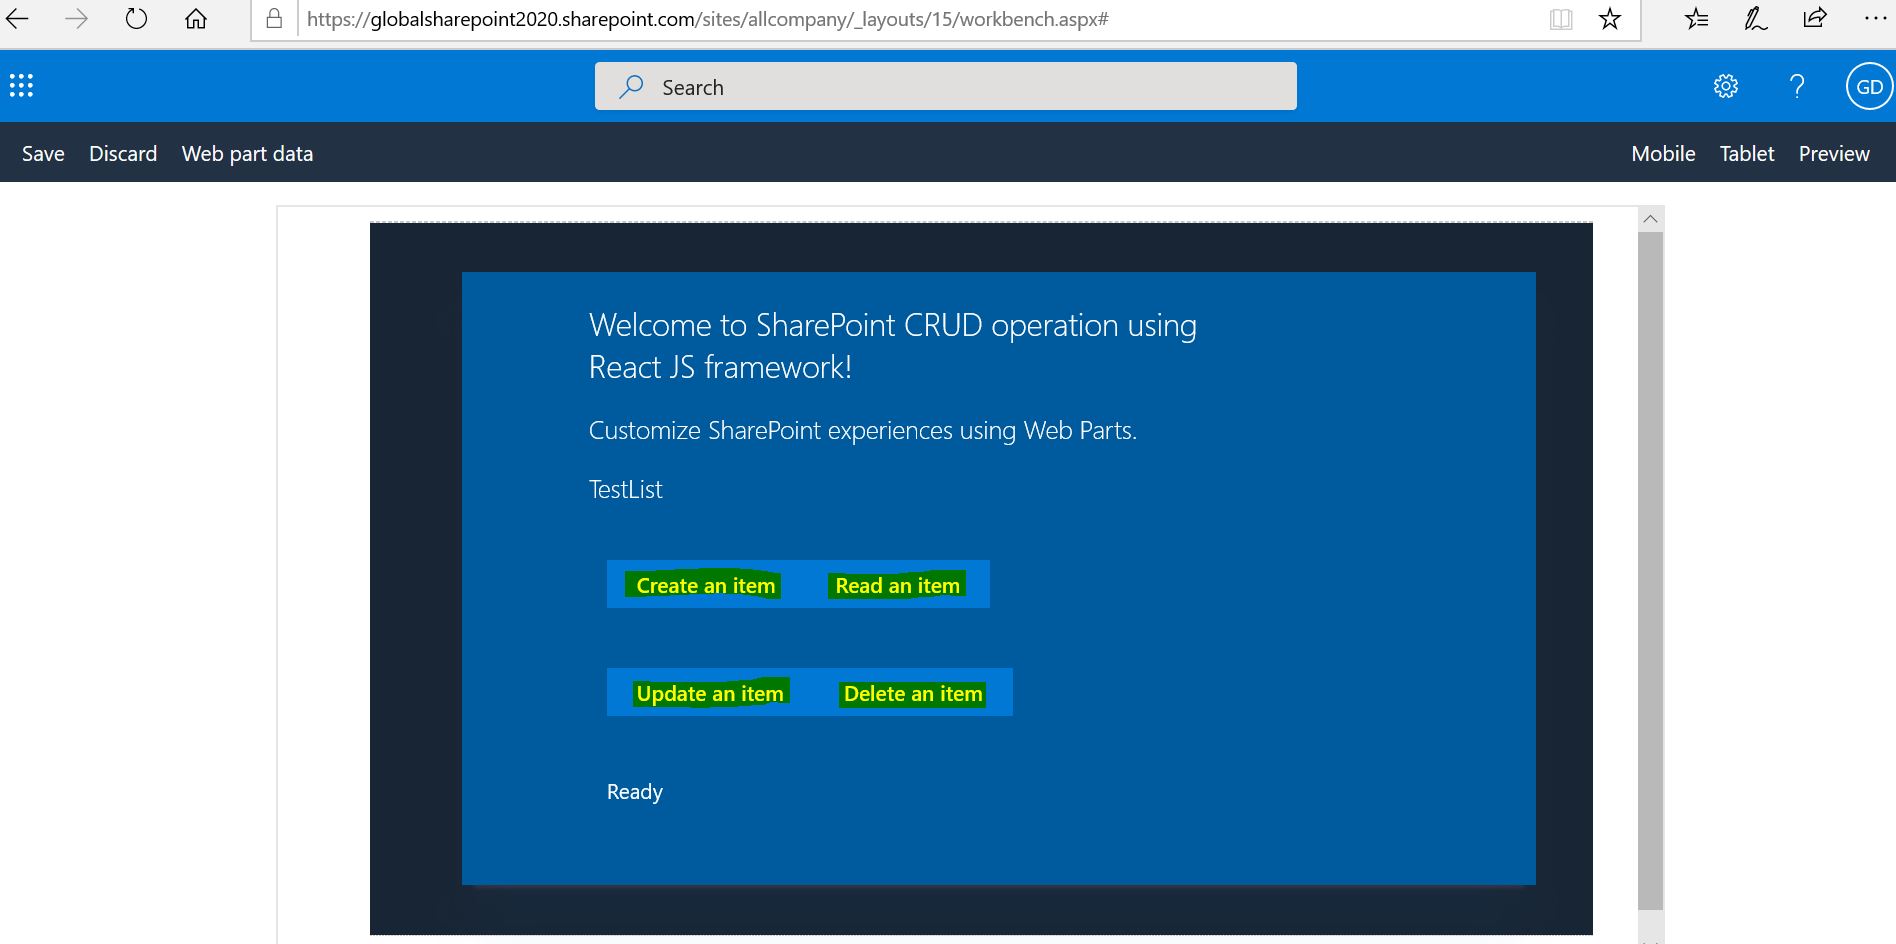 CRUD operation in SharePoint online, SharePoint Online CRUD operation using the SPFx React JS framework